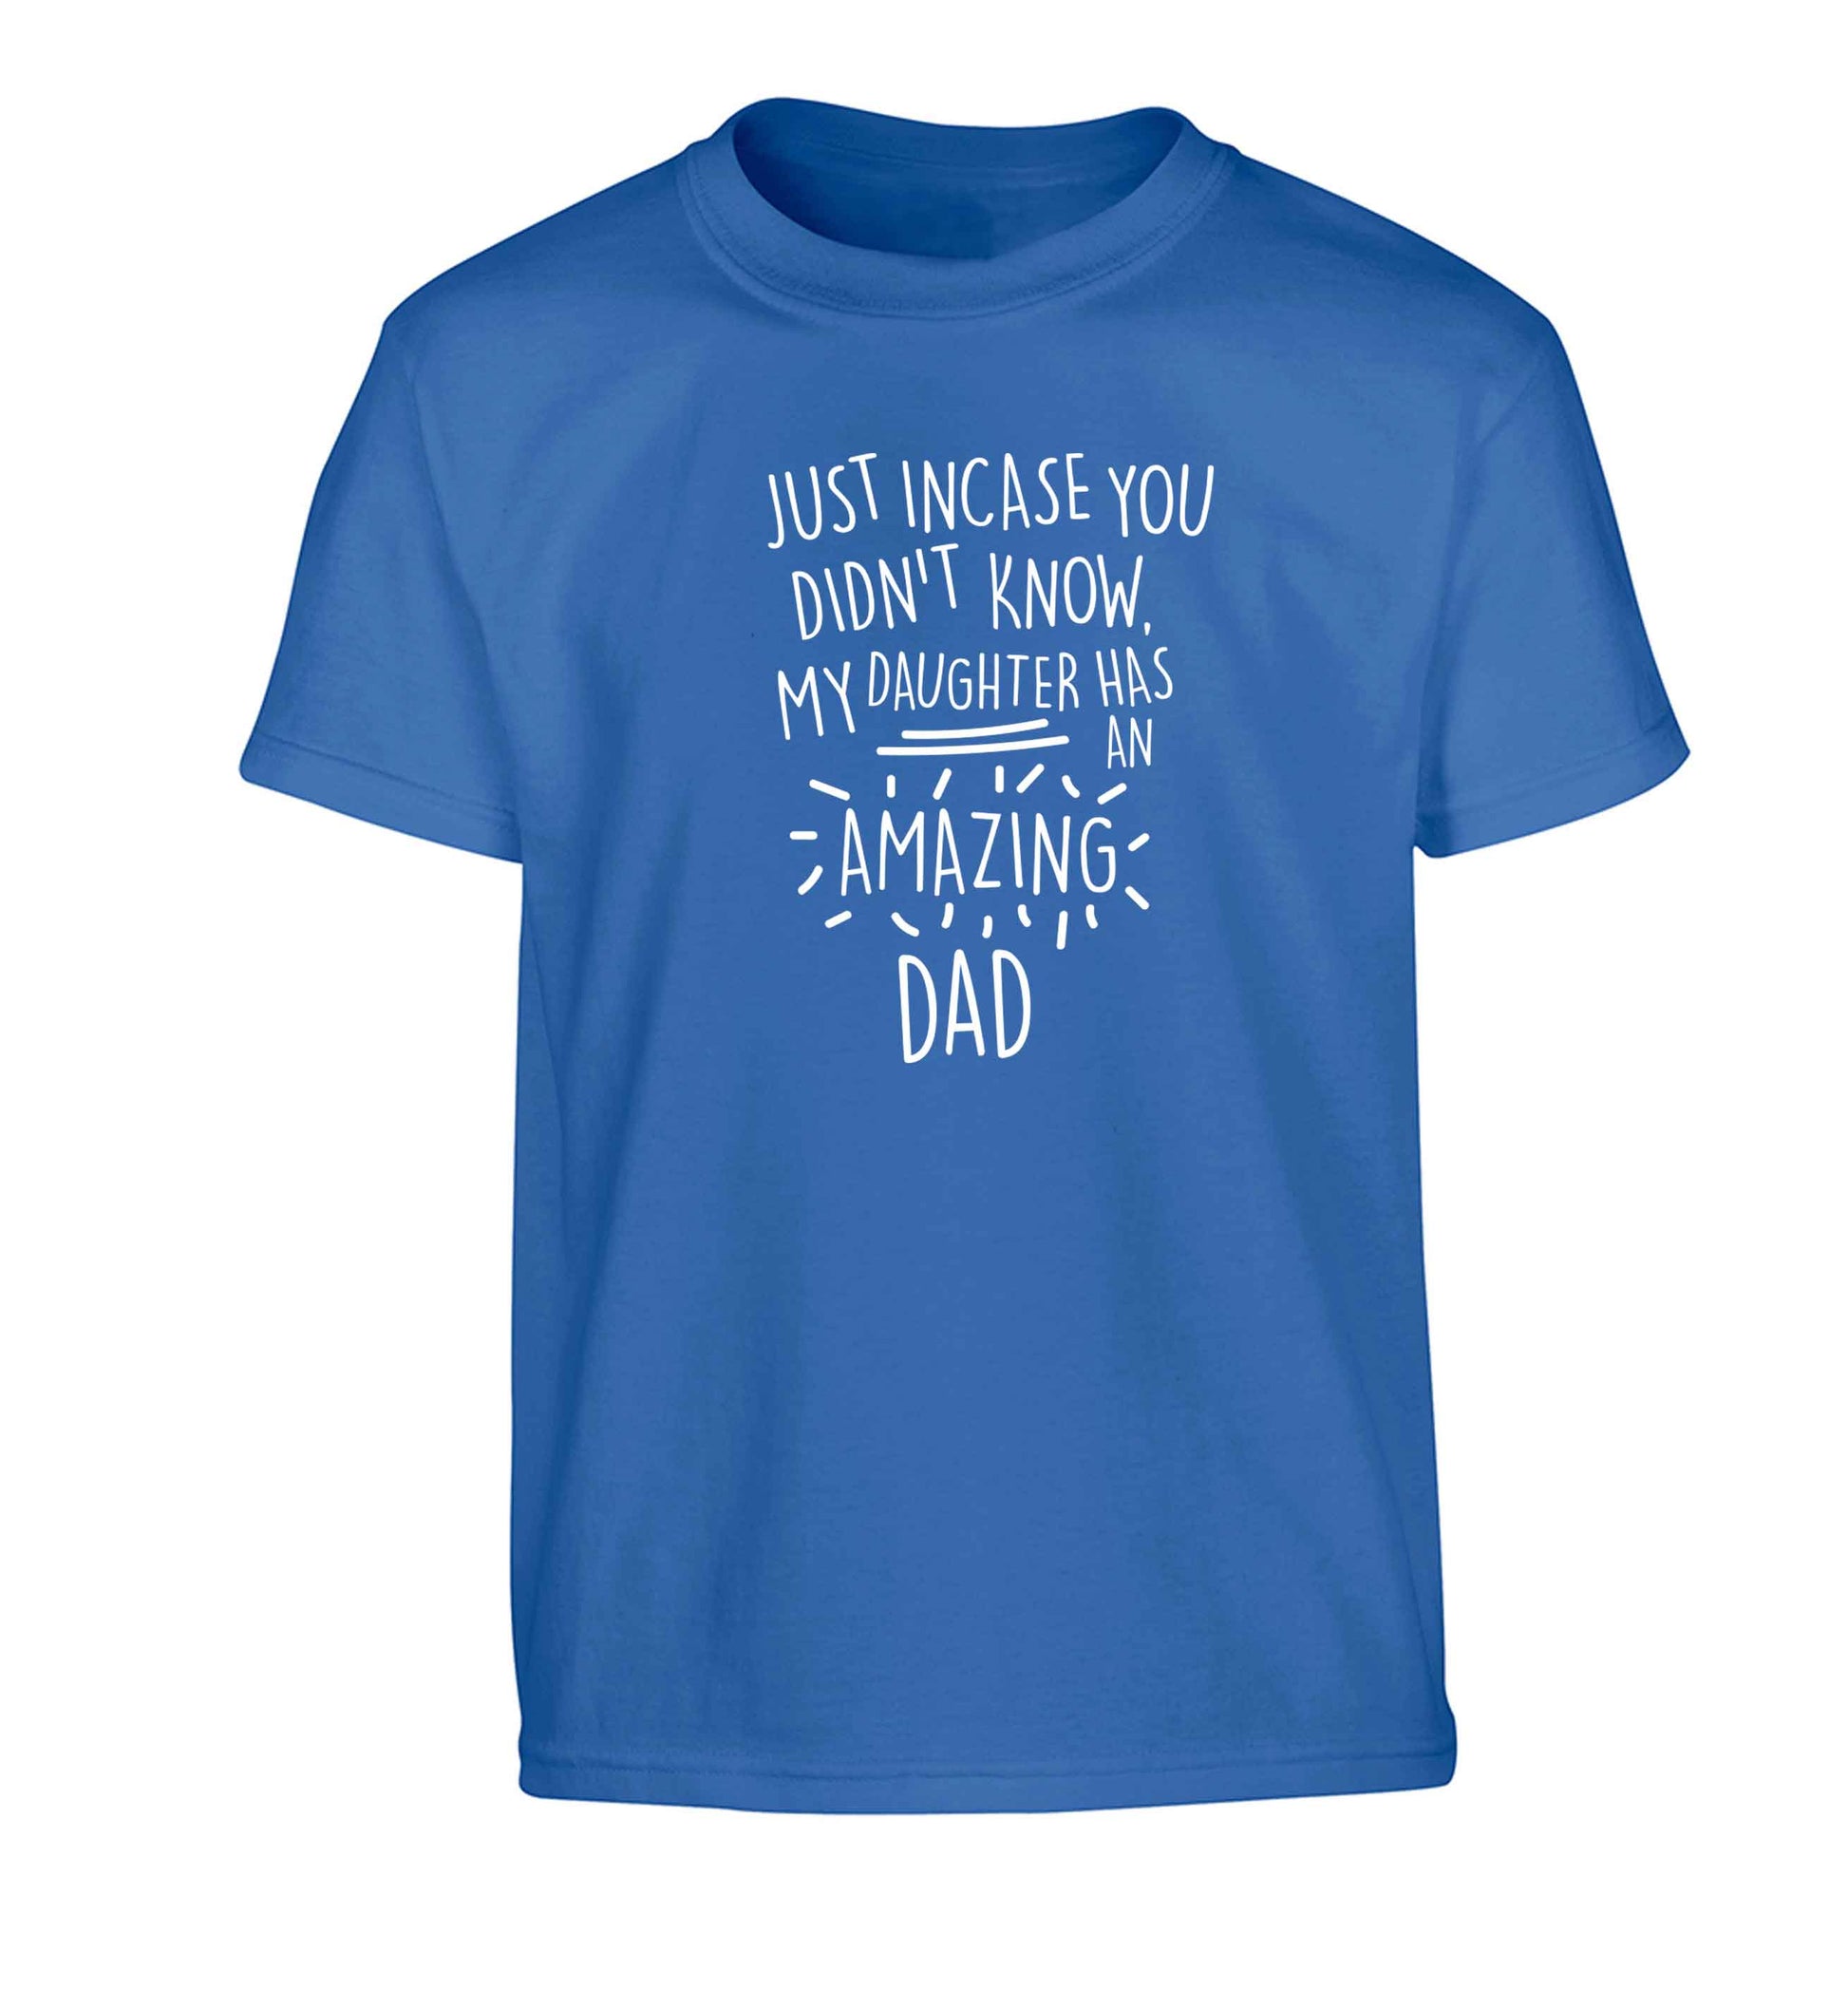 Just incase you didn't know my daughter has an amazing dad Children's blue Tshirt 12-13 Years